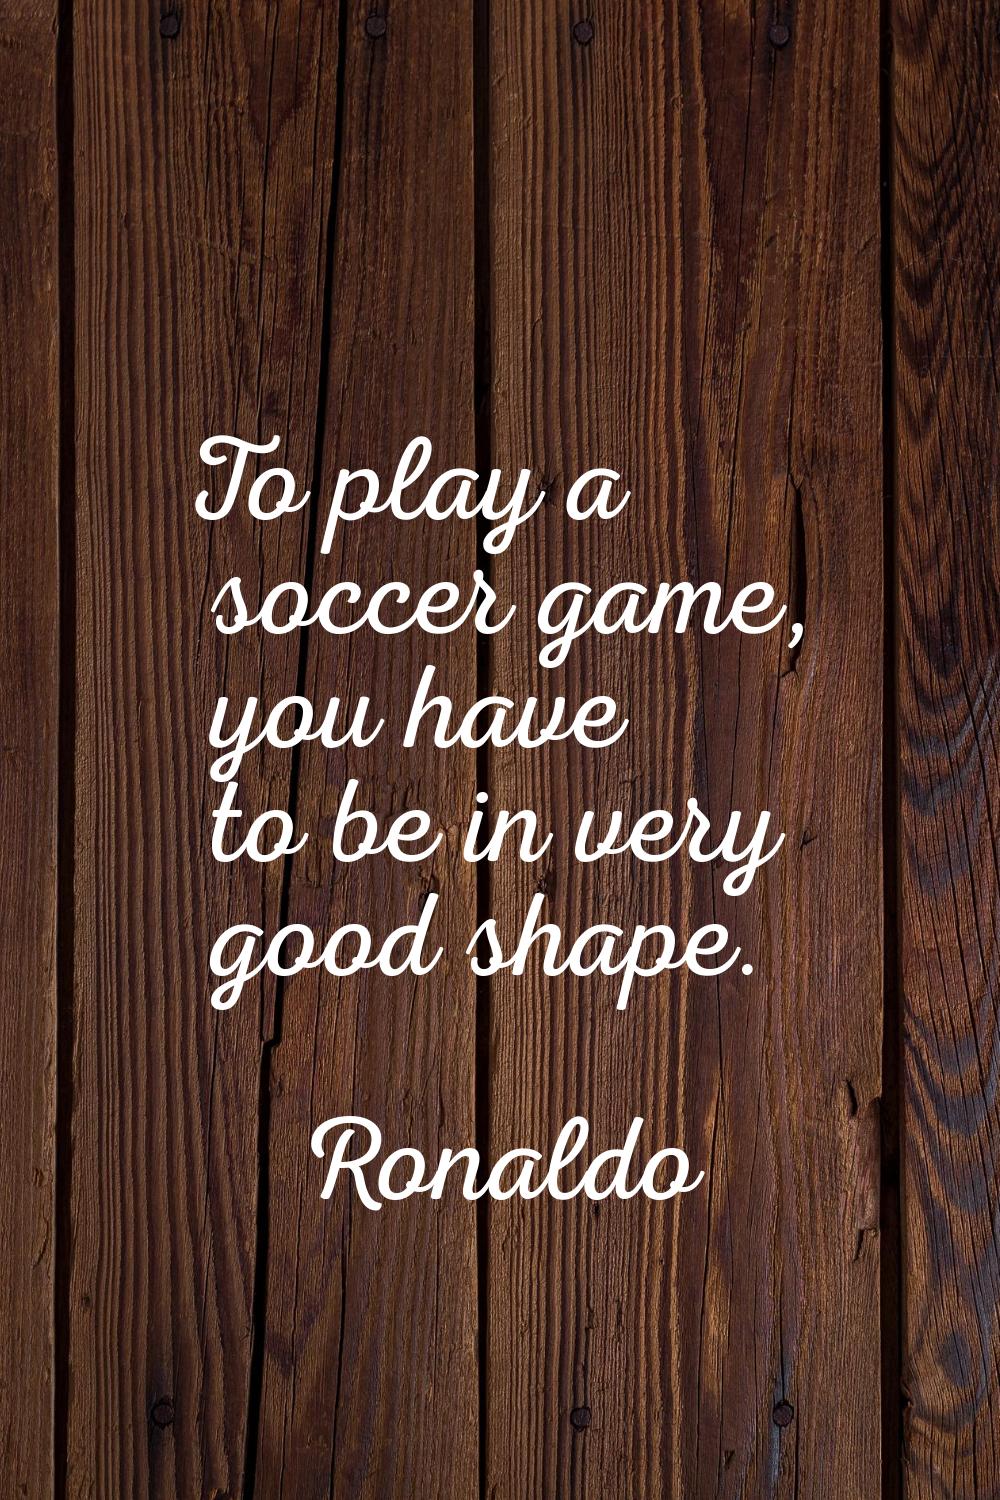 To play a soccer game, you have to be in very good shape.